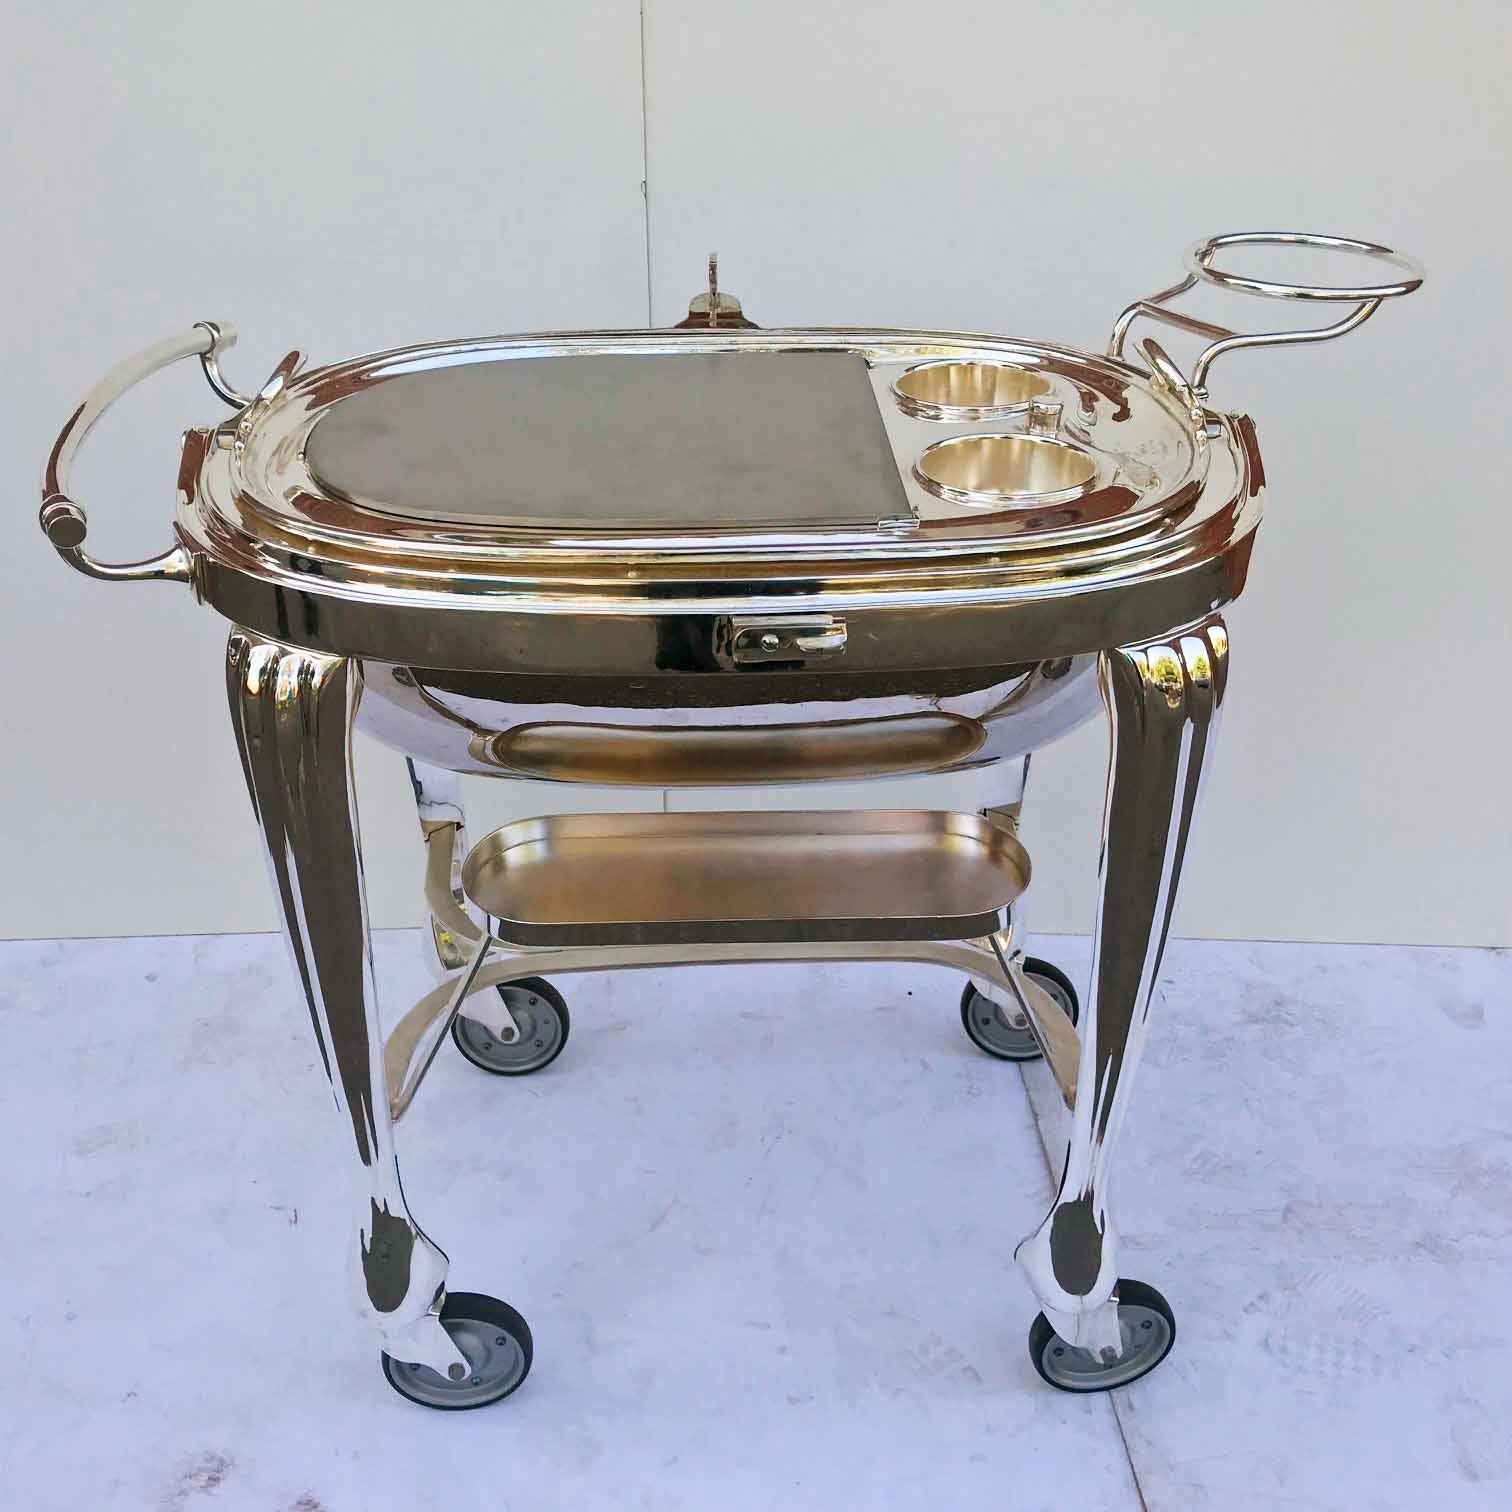 This model was produced in the 1960s and is all metal which created a more sculptural look than the partially wooden version. Essentially, it has the same form as a Victorian /Edwardian breakfast dish but more so. The carving surface is heated by a